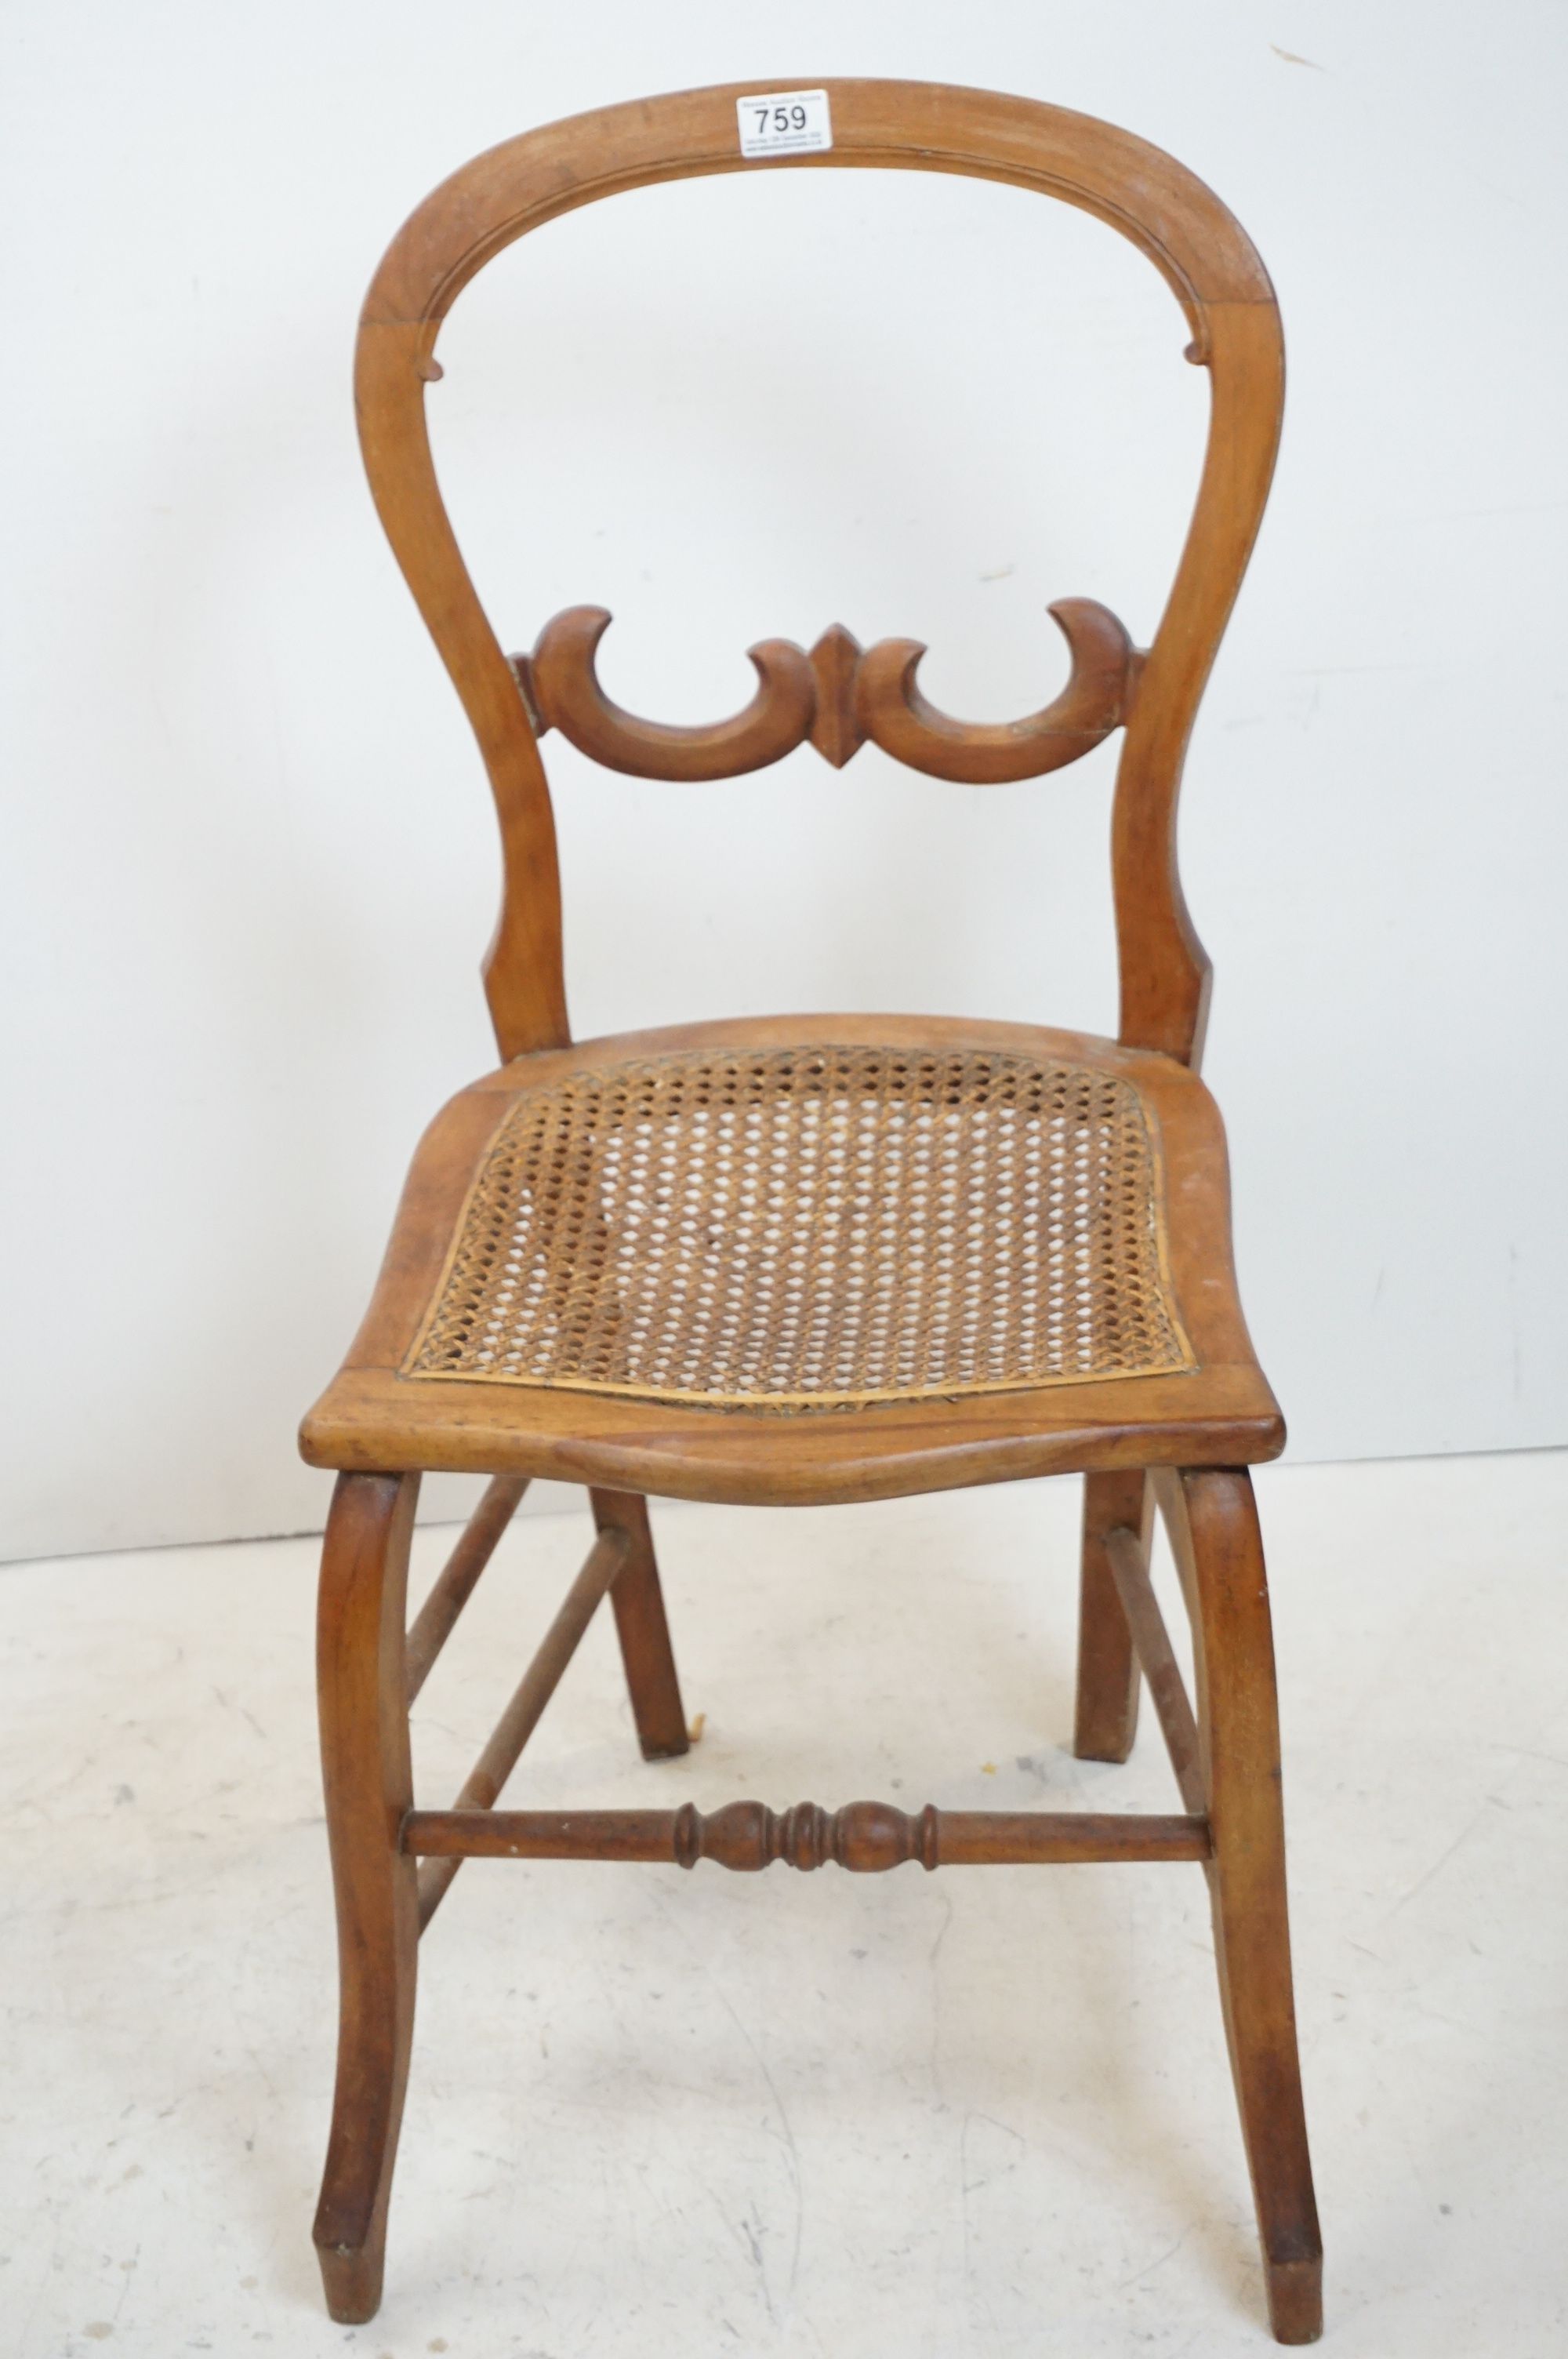 Victorian Bedroom Chair with entwined ornately carved back together with a Victorian Balloon Back - Image 5 of 6